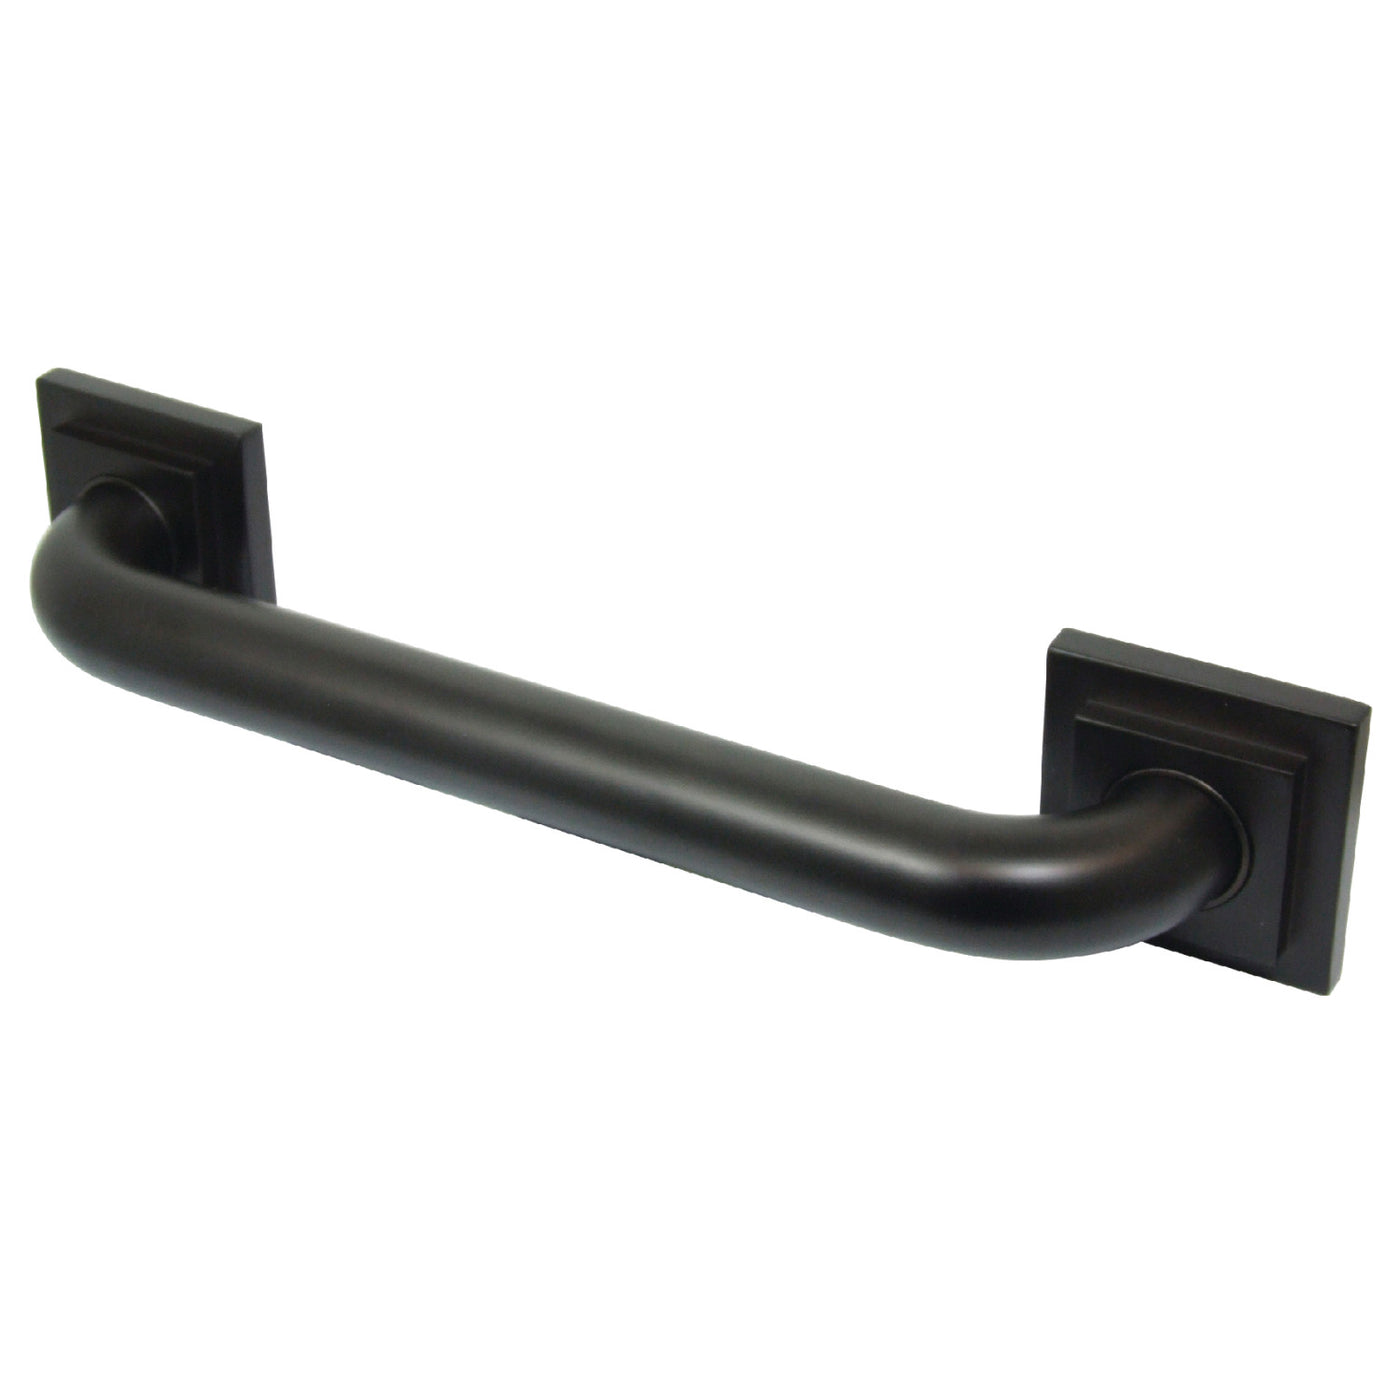 Elements of Design EDR614365 36-Inch x 1-1/4-Inch O.D Grab Bar, Oil Rubbed Bronze